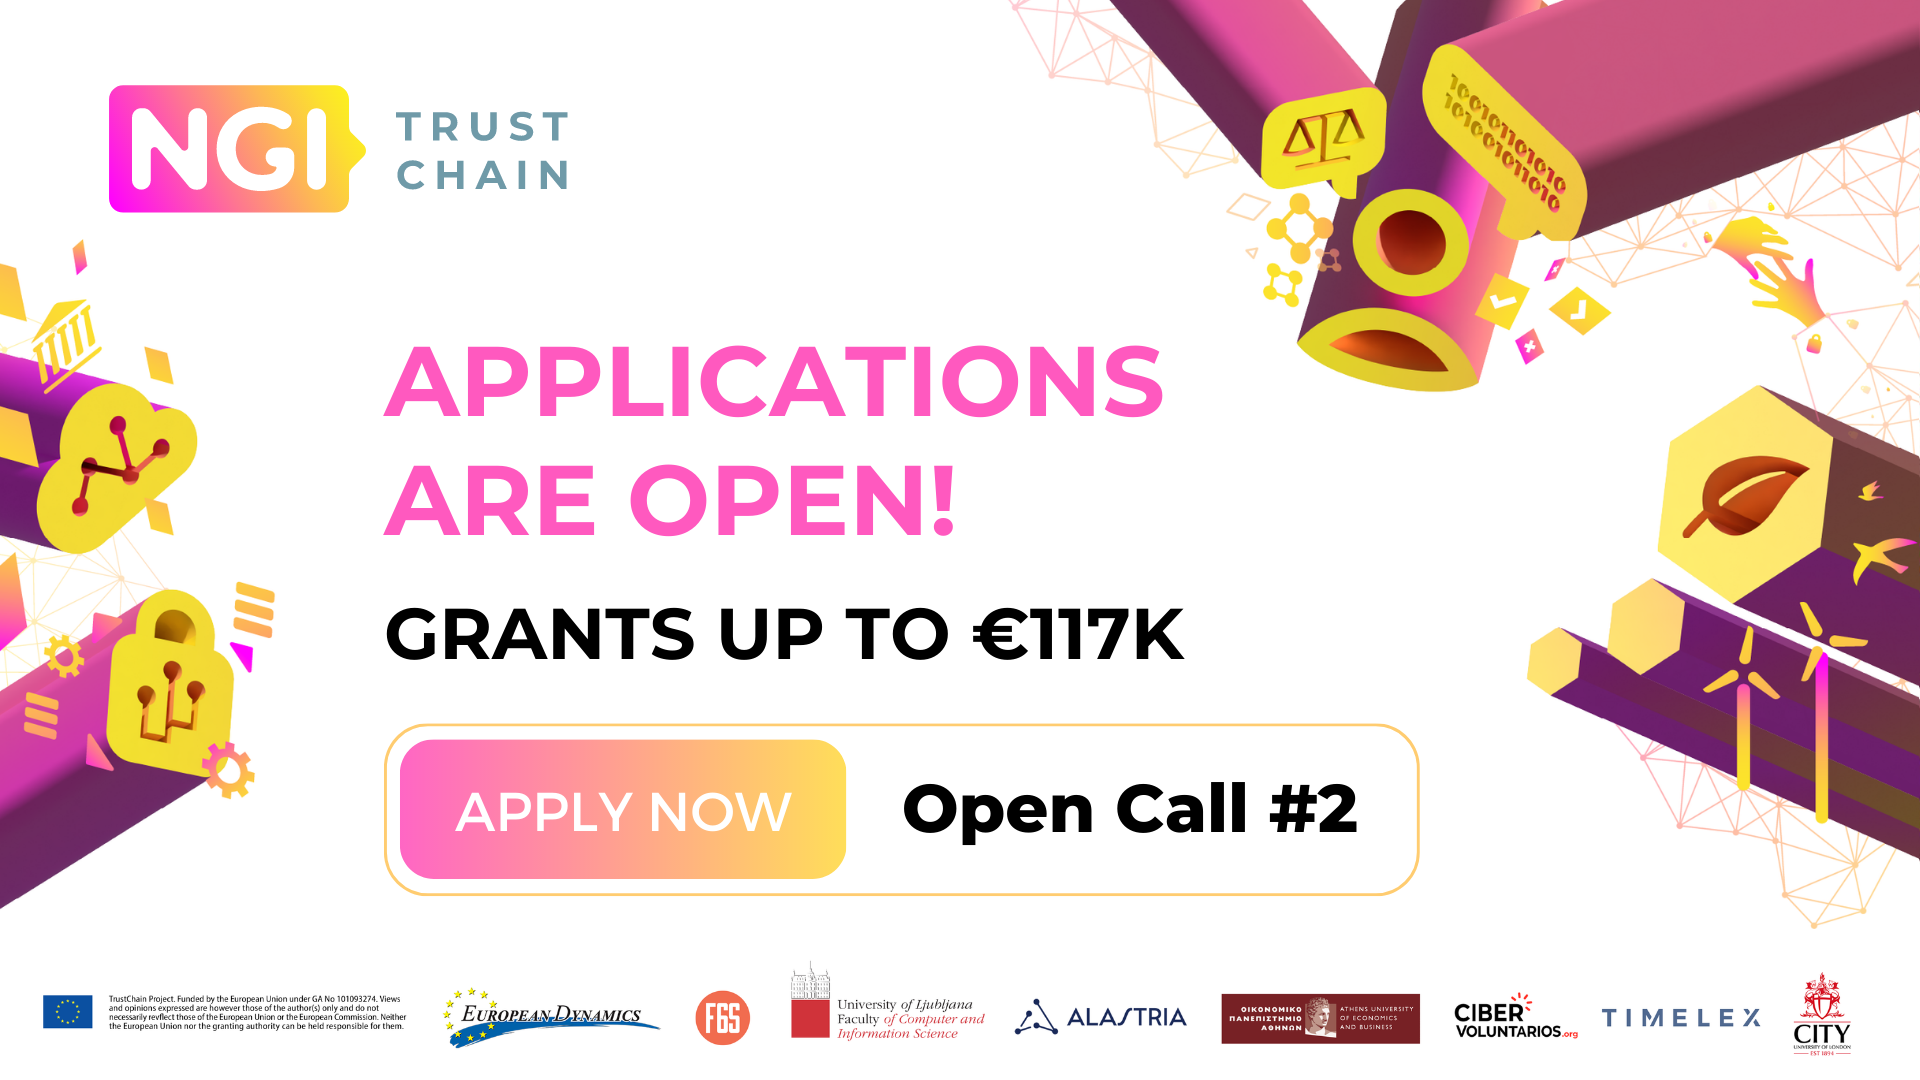 Trustchain open call2 on user privacy and data governance launched!